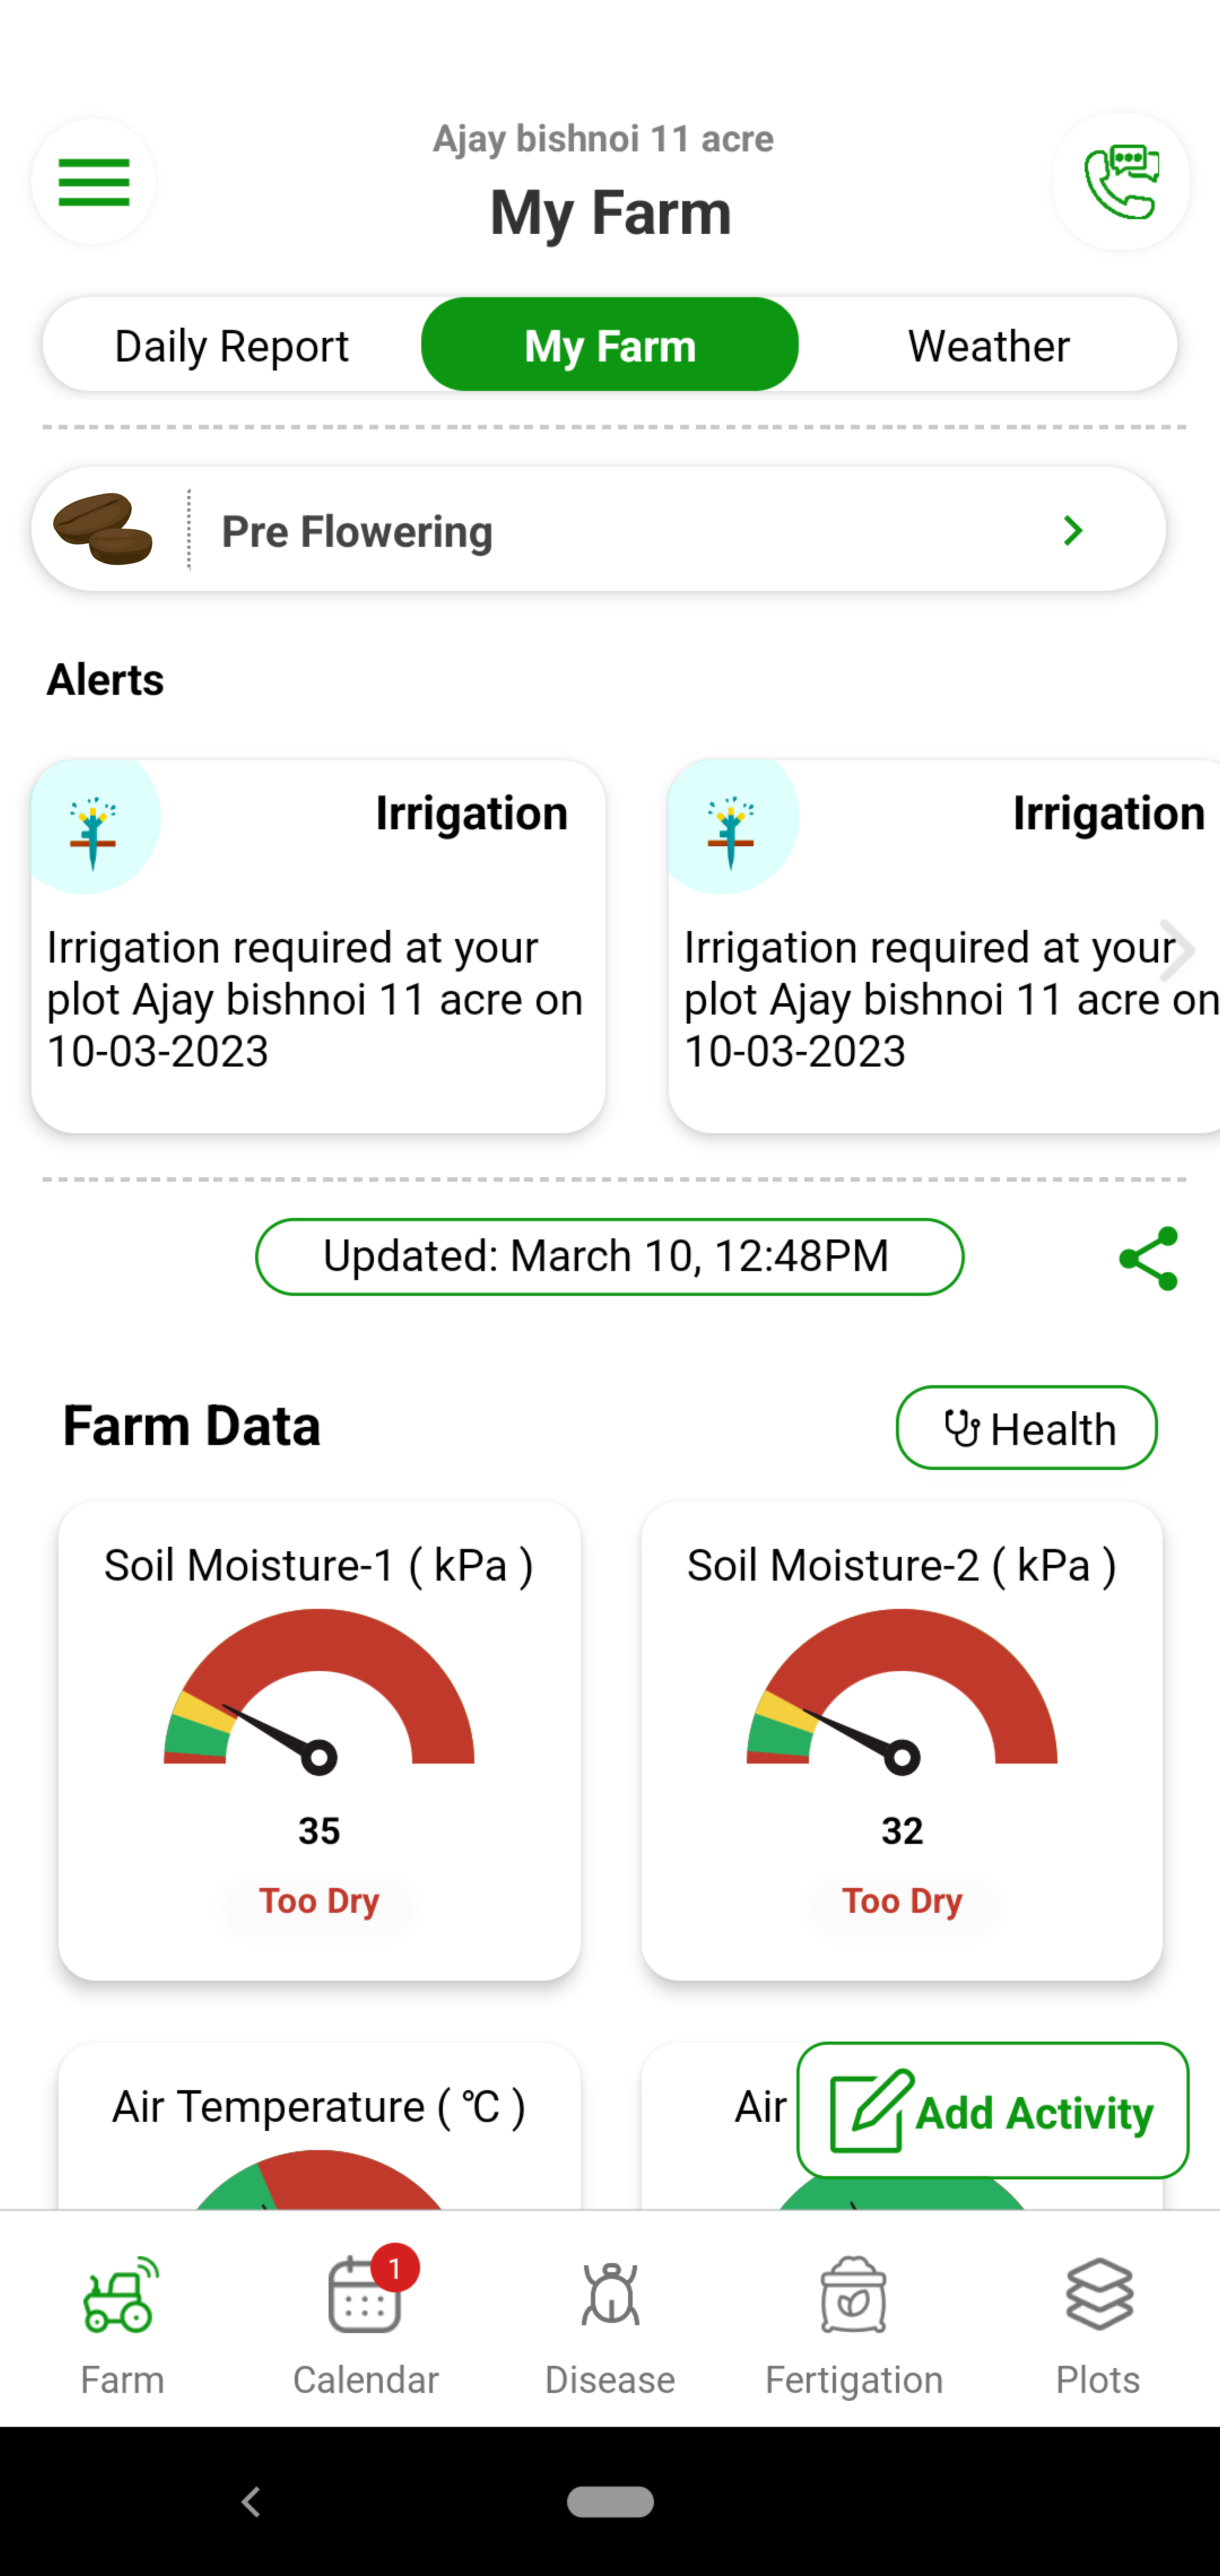 Precise irrigation given to the Coffee can help you get the best quality beans from the plants. Over irrigation leads to wilting in the plants. Coffee’s water requirements vary based on soil type and stage. With Fyllo’s device containing soil moisture and soil temperature sensor and intelligent software, you get alerts on how much water to provide to the crop. You can also see and visualize evapotranspiration (Etc) values of the crop. You can perfectly manage the water requirements to get the perfect size, color and sugar.